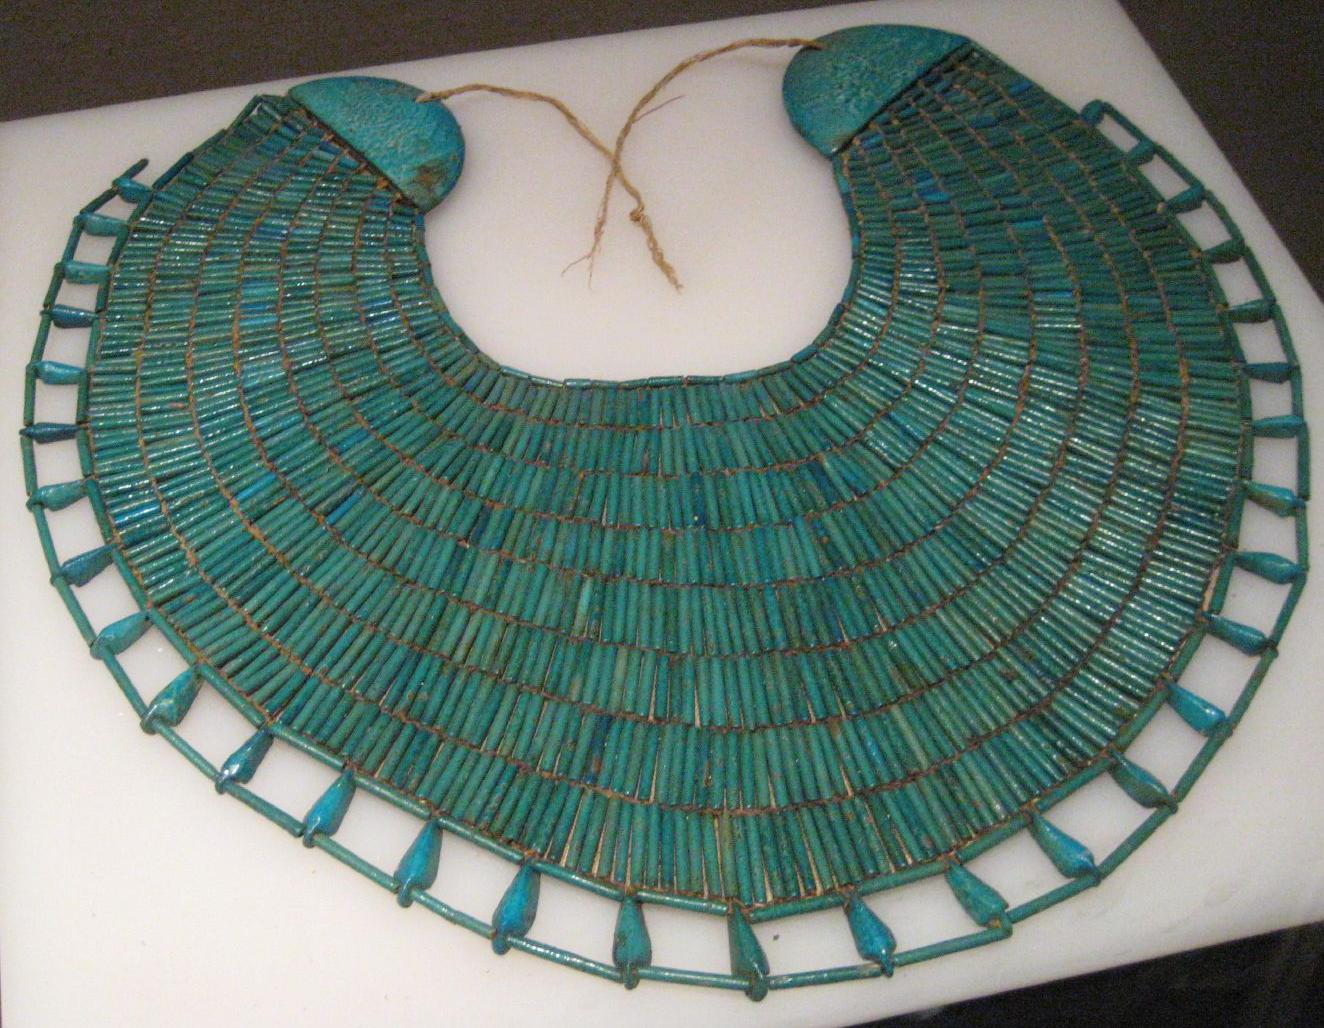 Broad collar beaded Egyptian necklace of the 12th dynasty official Wah from his Theban tomb. By https://www.flickr.com/photos/unforth/ - https://www.flickr.com/photos/unforth/2555919469/in/set-72157605469948310/, CC BY-SA 2.0